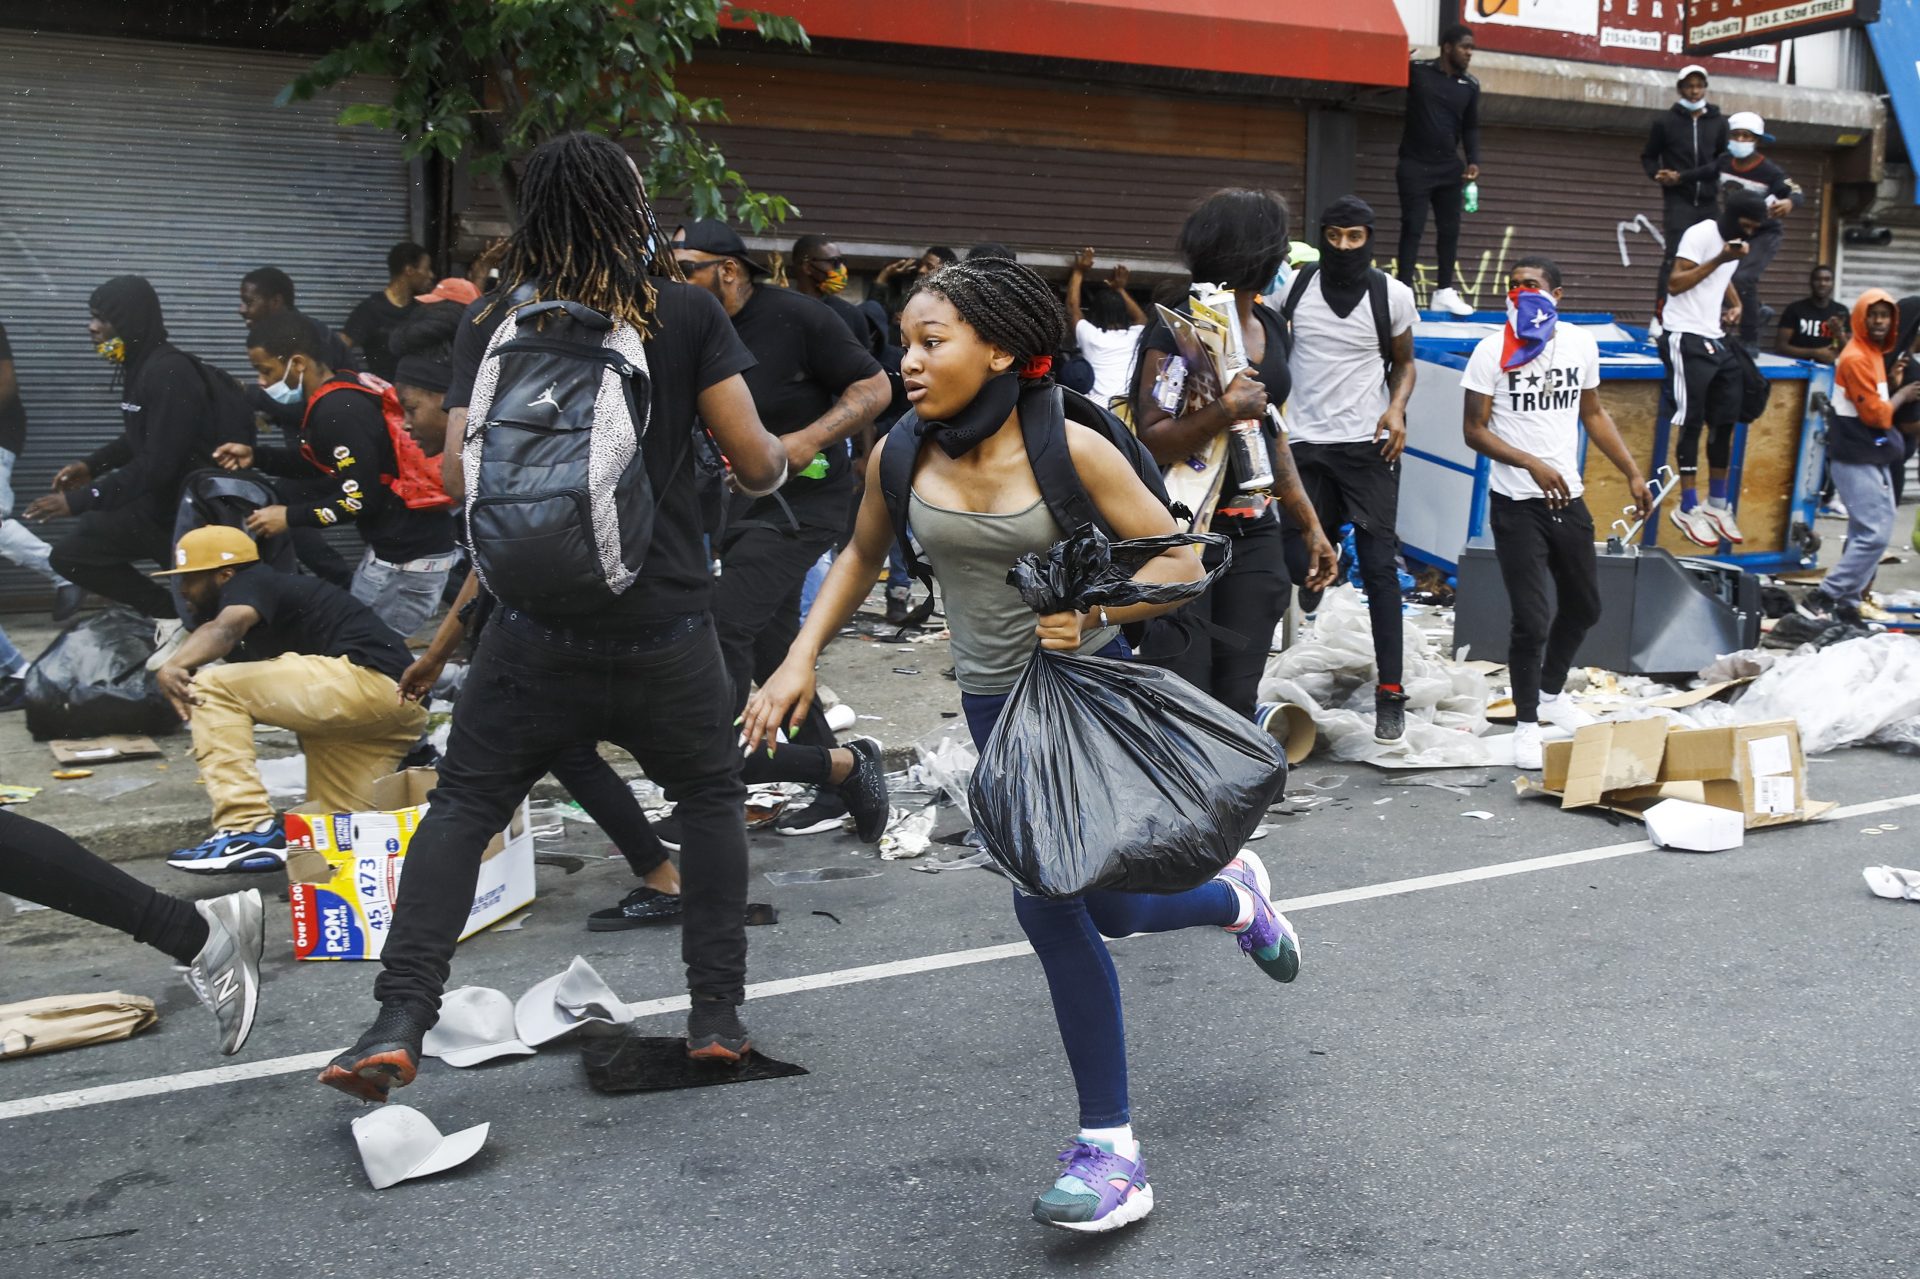 People run from the area as police officers approach stores that were broken into as protests continue on Sunday, May 31, 2020, in Philadelphia. Protests were held throughout the country over the death of Floyd, a black man who died after being restrained by Minneapolis police officers on May 25.